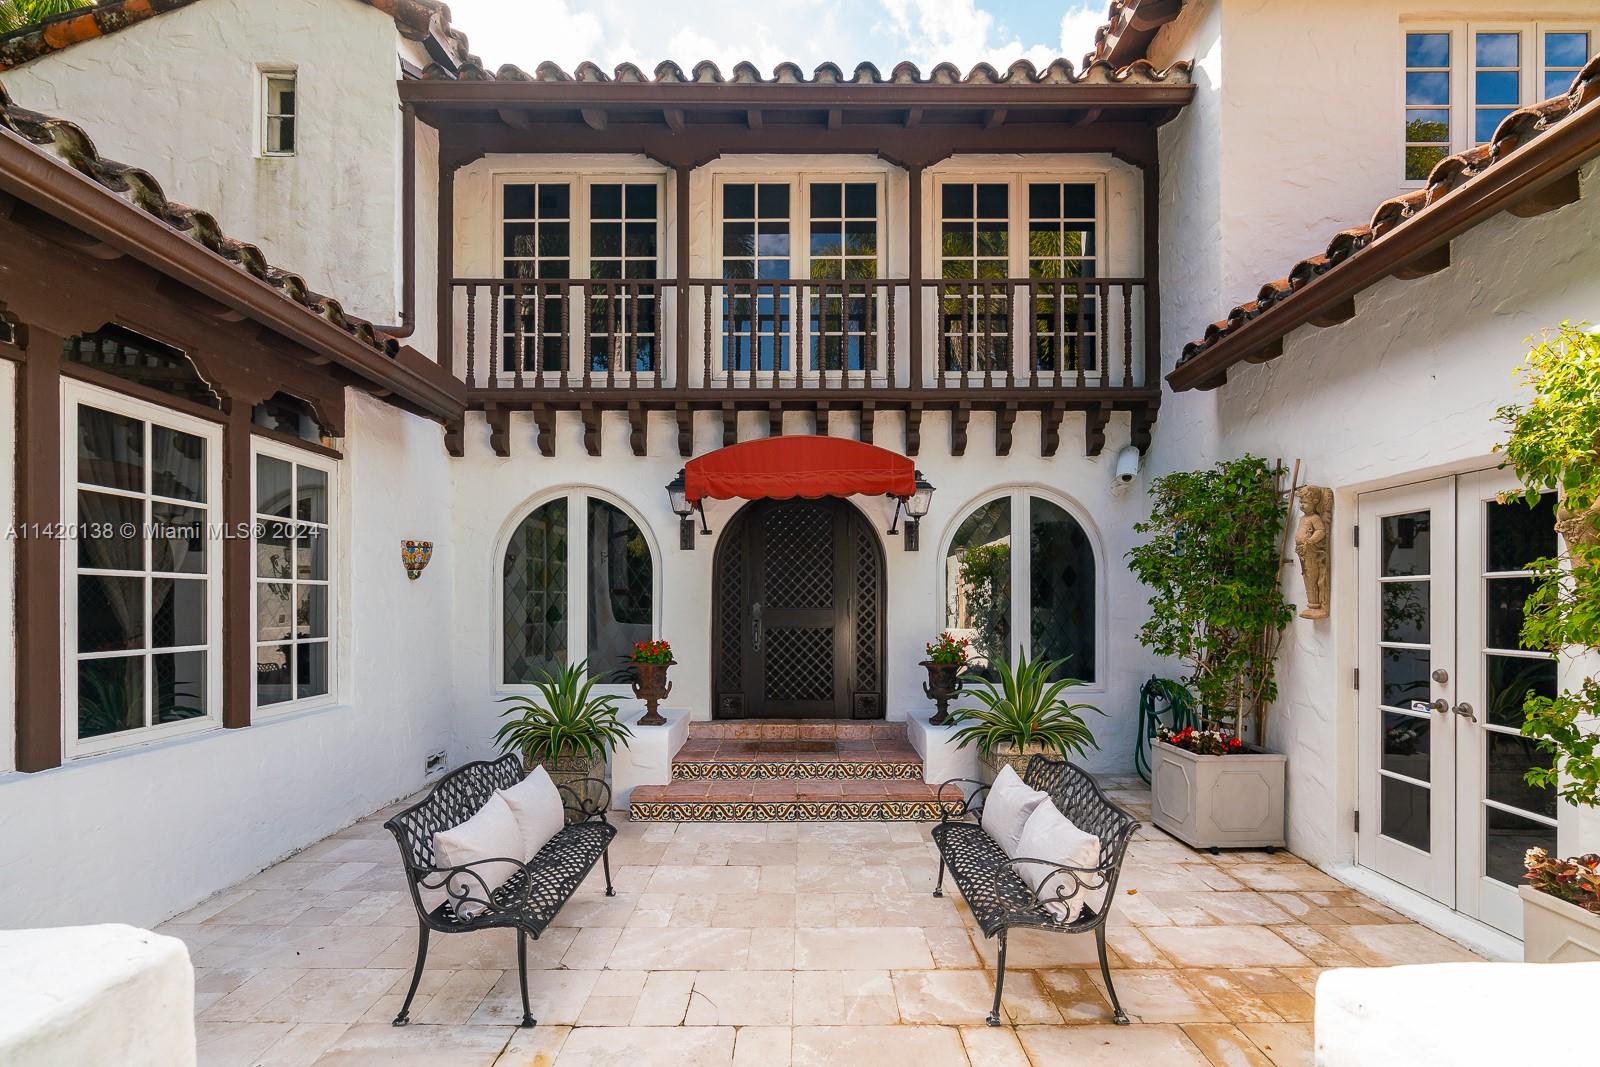 1920's Old Spanish style villa with 6397 actual square feet (5044 living area) on a 15,750 sq ft lot steps from the Biltmore Hotel & Golf Course, Salvadore Park and the Venetian Pool. Classical architecture with loggia, Palladian window frames, high timber-beamed ceiling in the main living room & sun-dappled courtyards with flowing fountains. There are 6 bedrooms and 6.5 bathrooms. The primary bedroom suite & 3 other bedrooms are upstairs.  Guest bedroom and a maid's bedroom on the 1st floor. Summer kitchen, large library & office by the heated pool. The home is walled and gated and within walking distance to many Coral Gables landmark destinations and to Downtown Coral Gables. 2-car garage, impact doors & windows. Also available for annual lease at $29,000 a month or $39,000 furnished